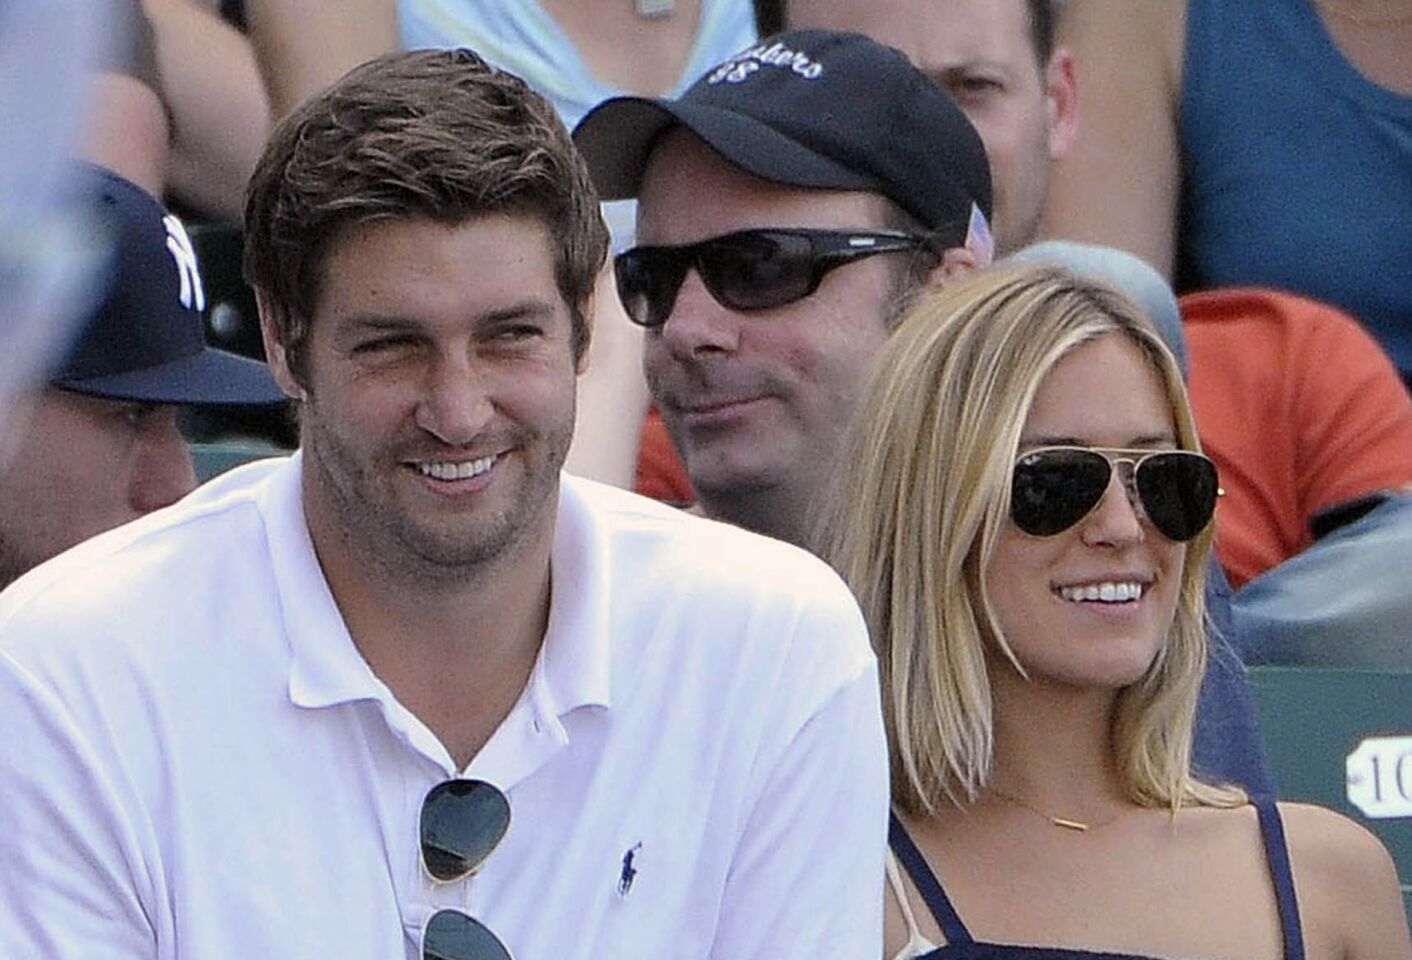 TV reality star Kristin Cavallari and husband Jay Cutler, a Chicago Bears quarterback, are getting ready for another baby. The pair, who tied the knot in June 2013, are parents to little ones Jaxon Wyatt and Camden Jack.